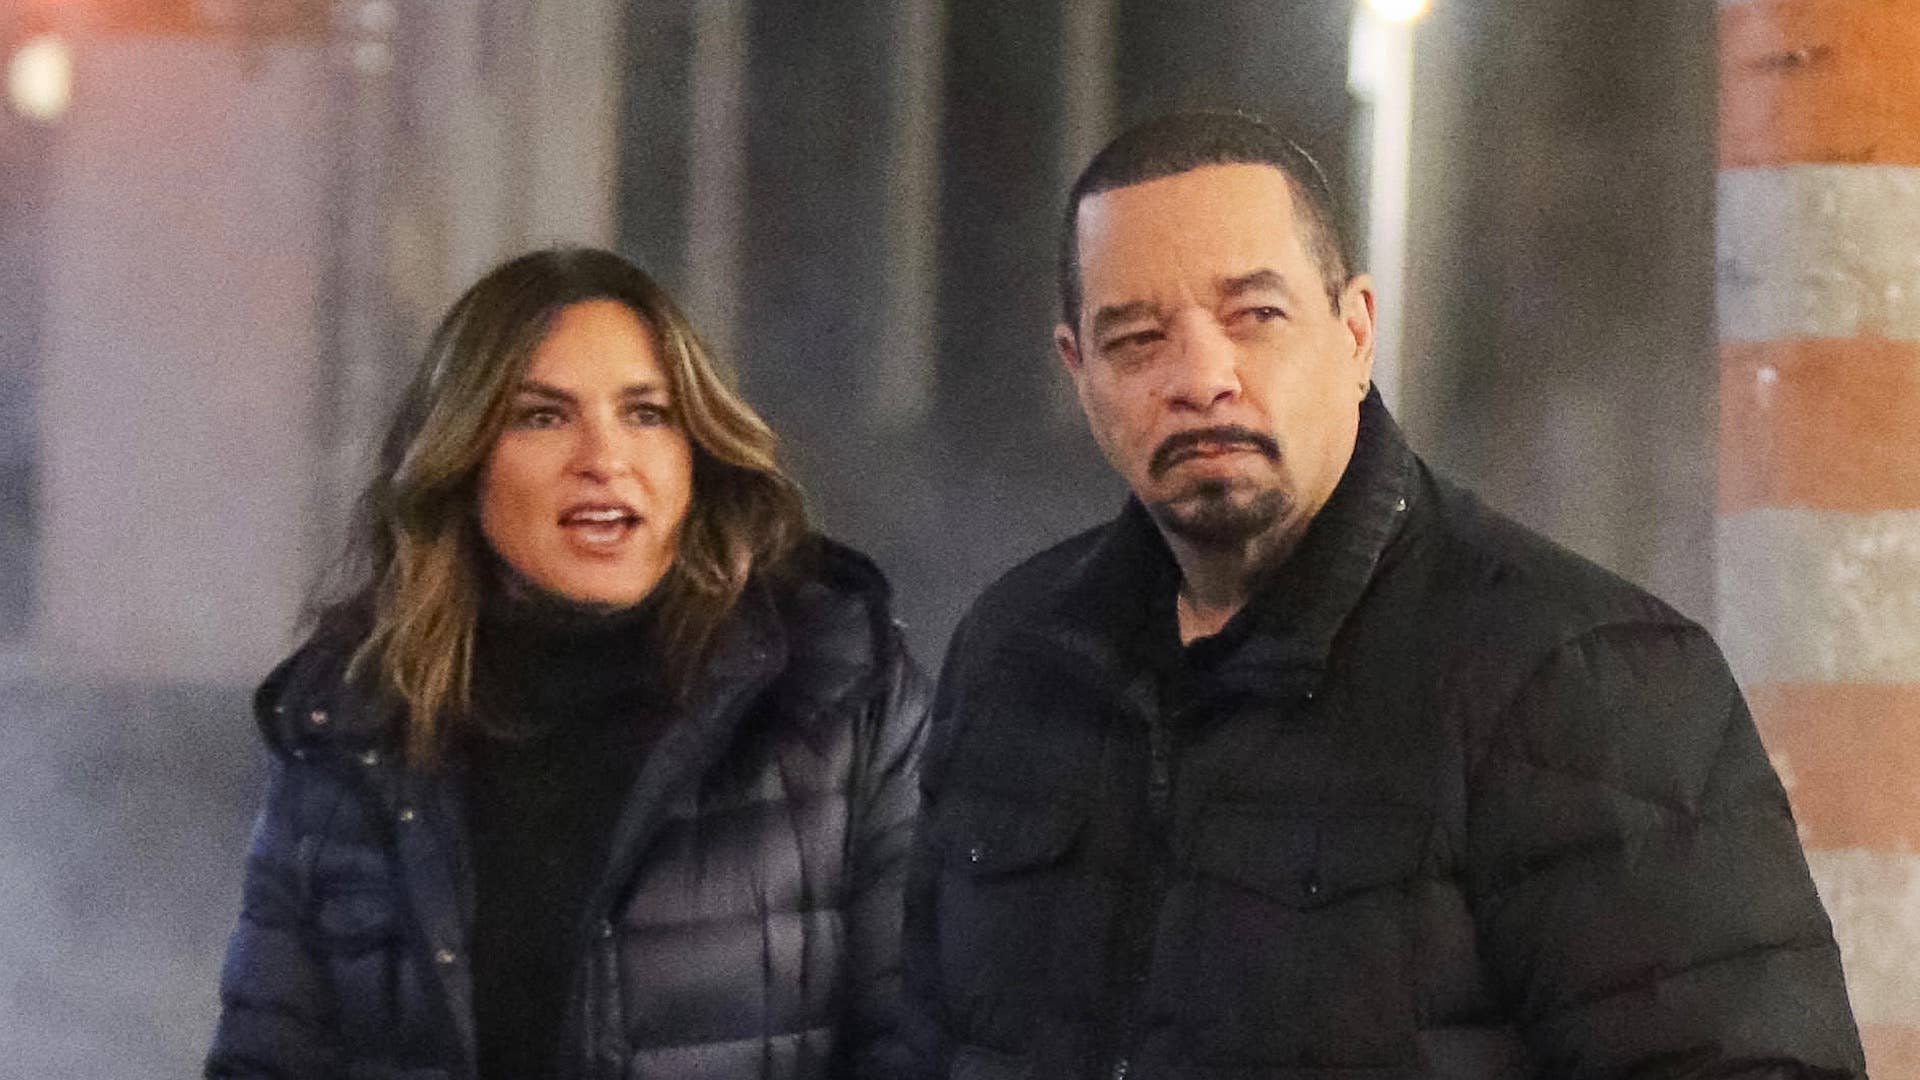 Mariska Hargitay and Ice T are seen on the film set of 'Law and Order: Special Victims Unit'